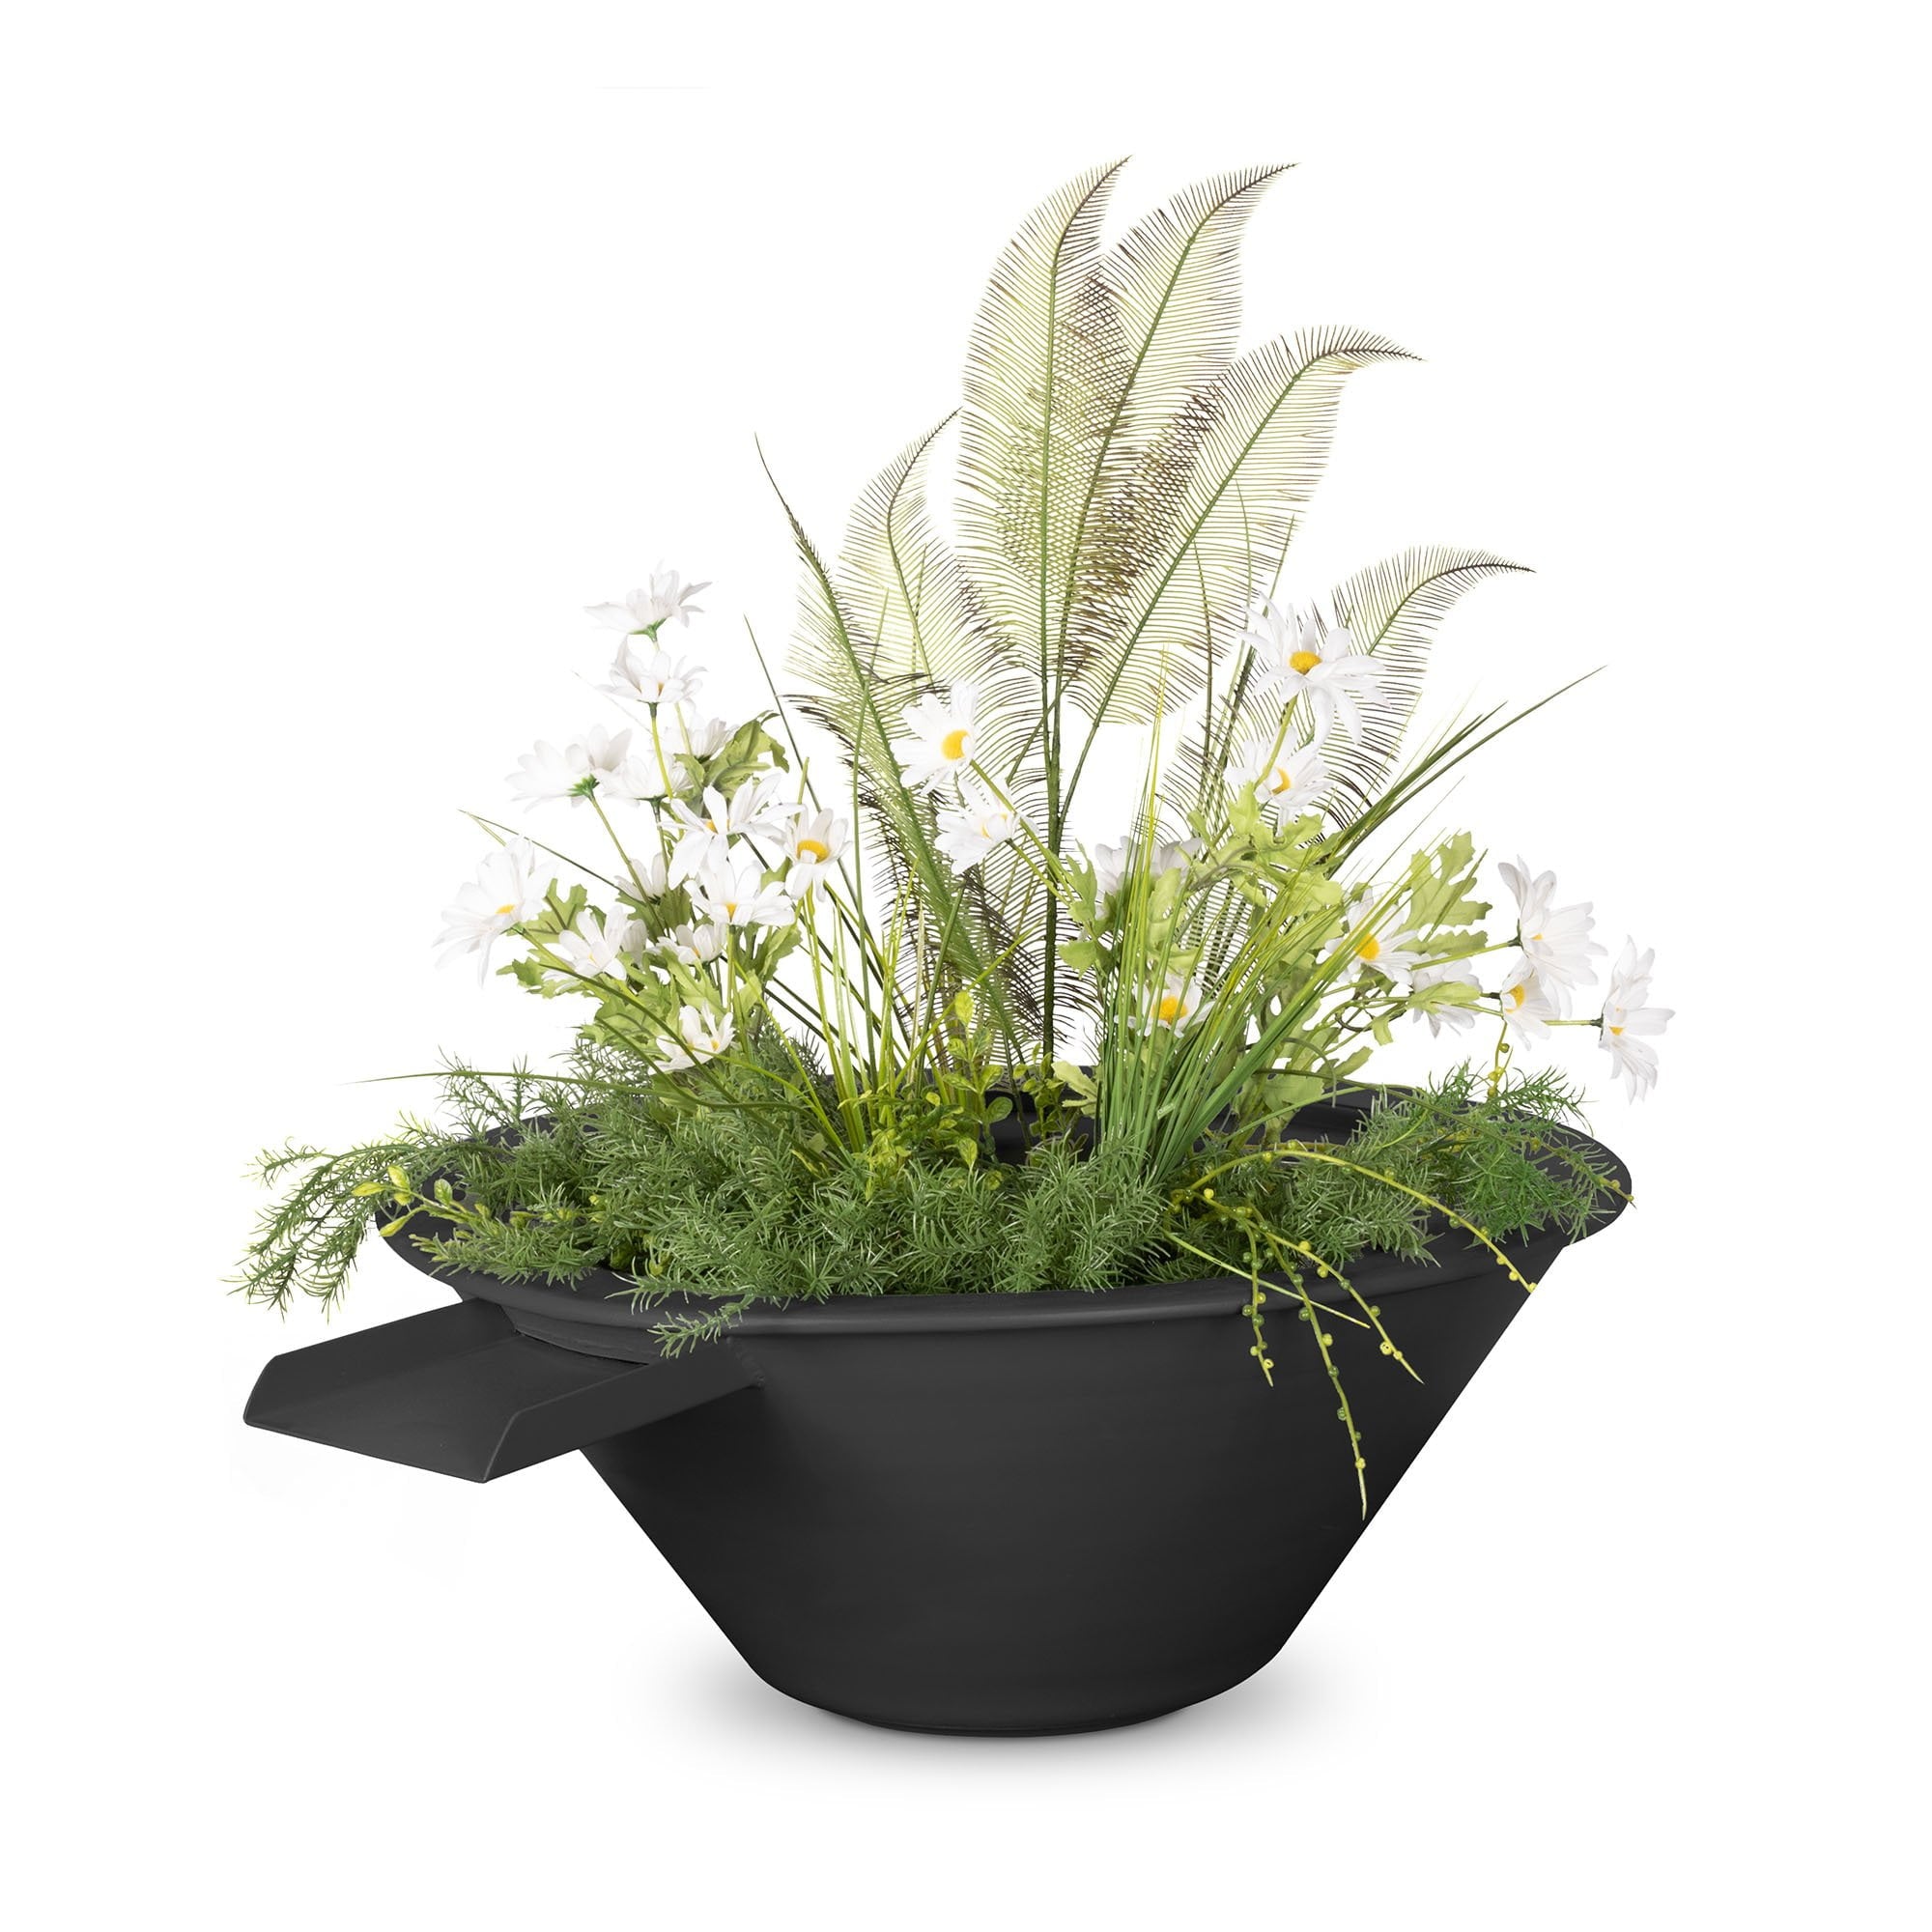 The Outdoor Plus Cazo Powder Coated Metal Planter & Water Bowl